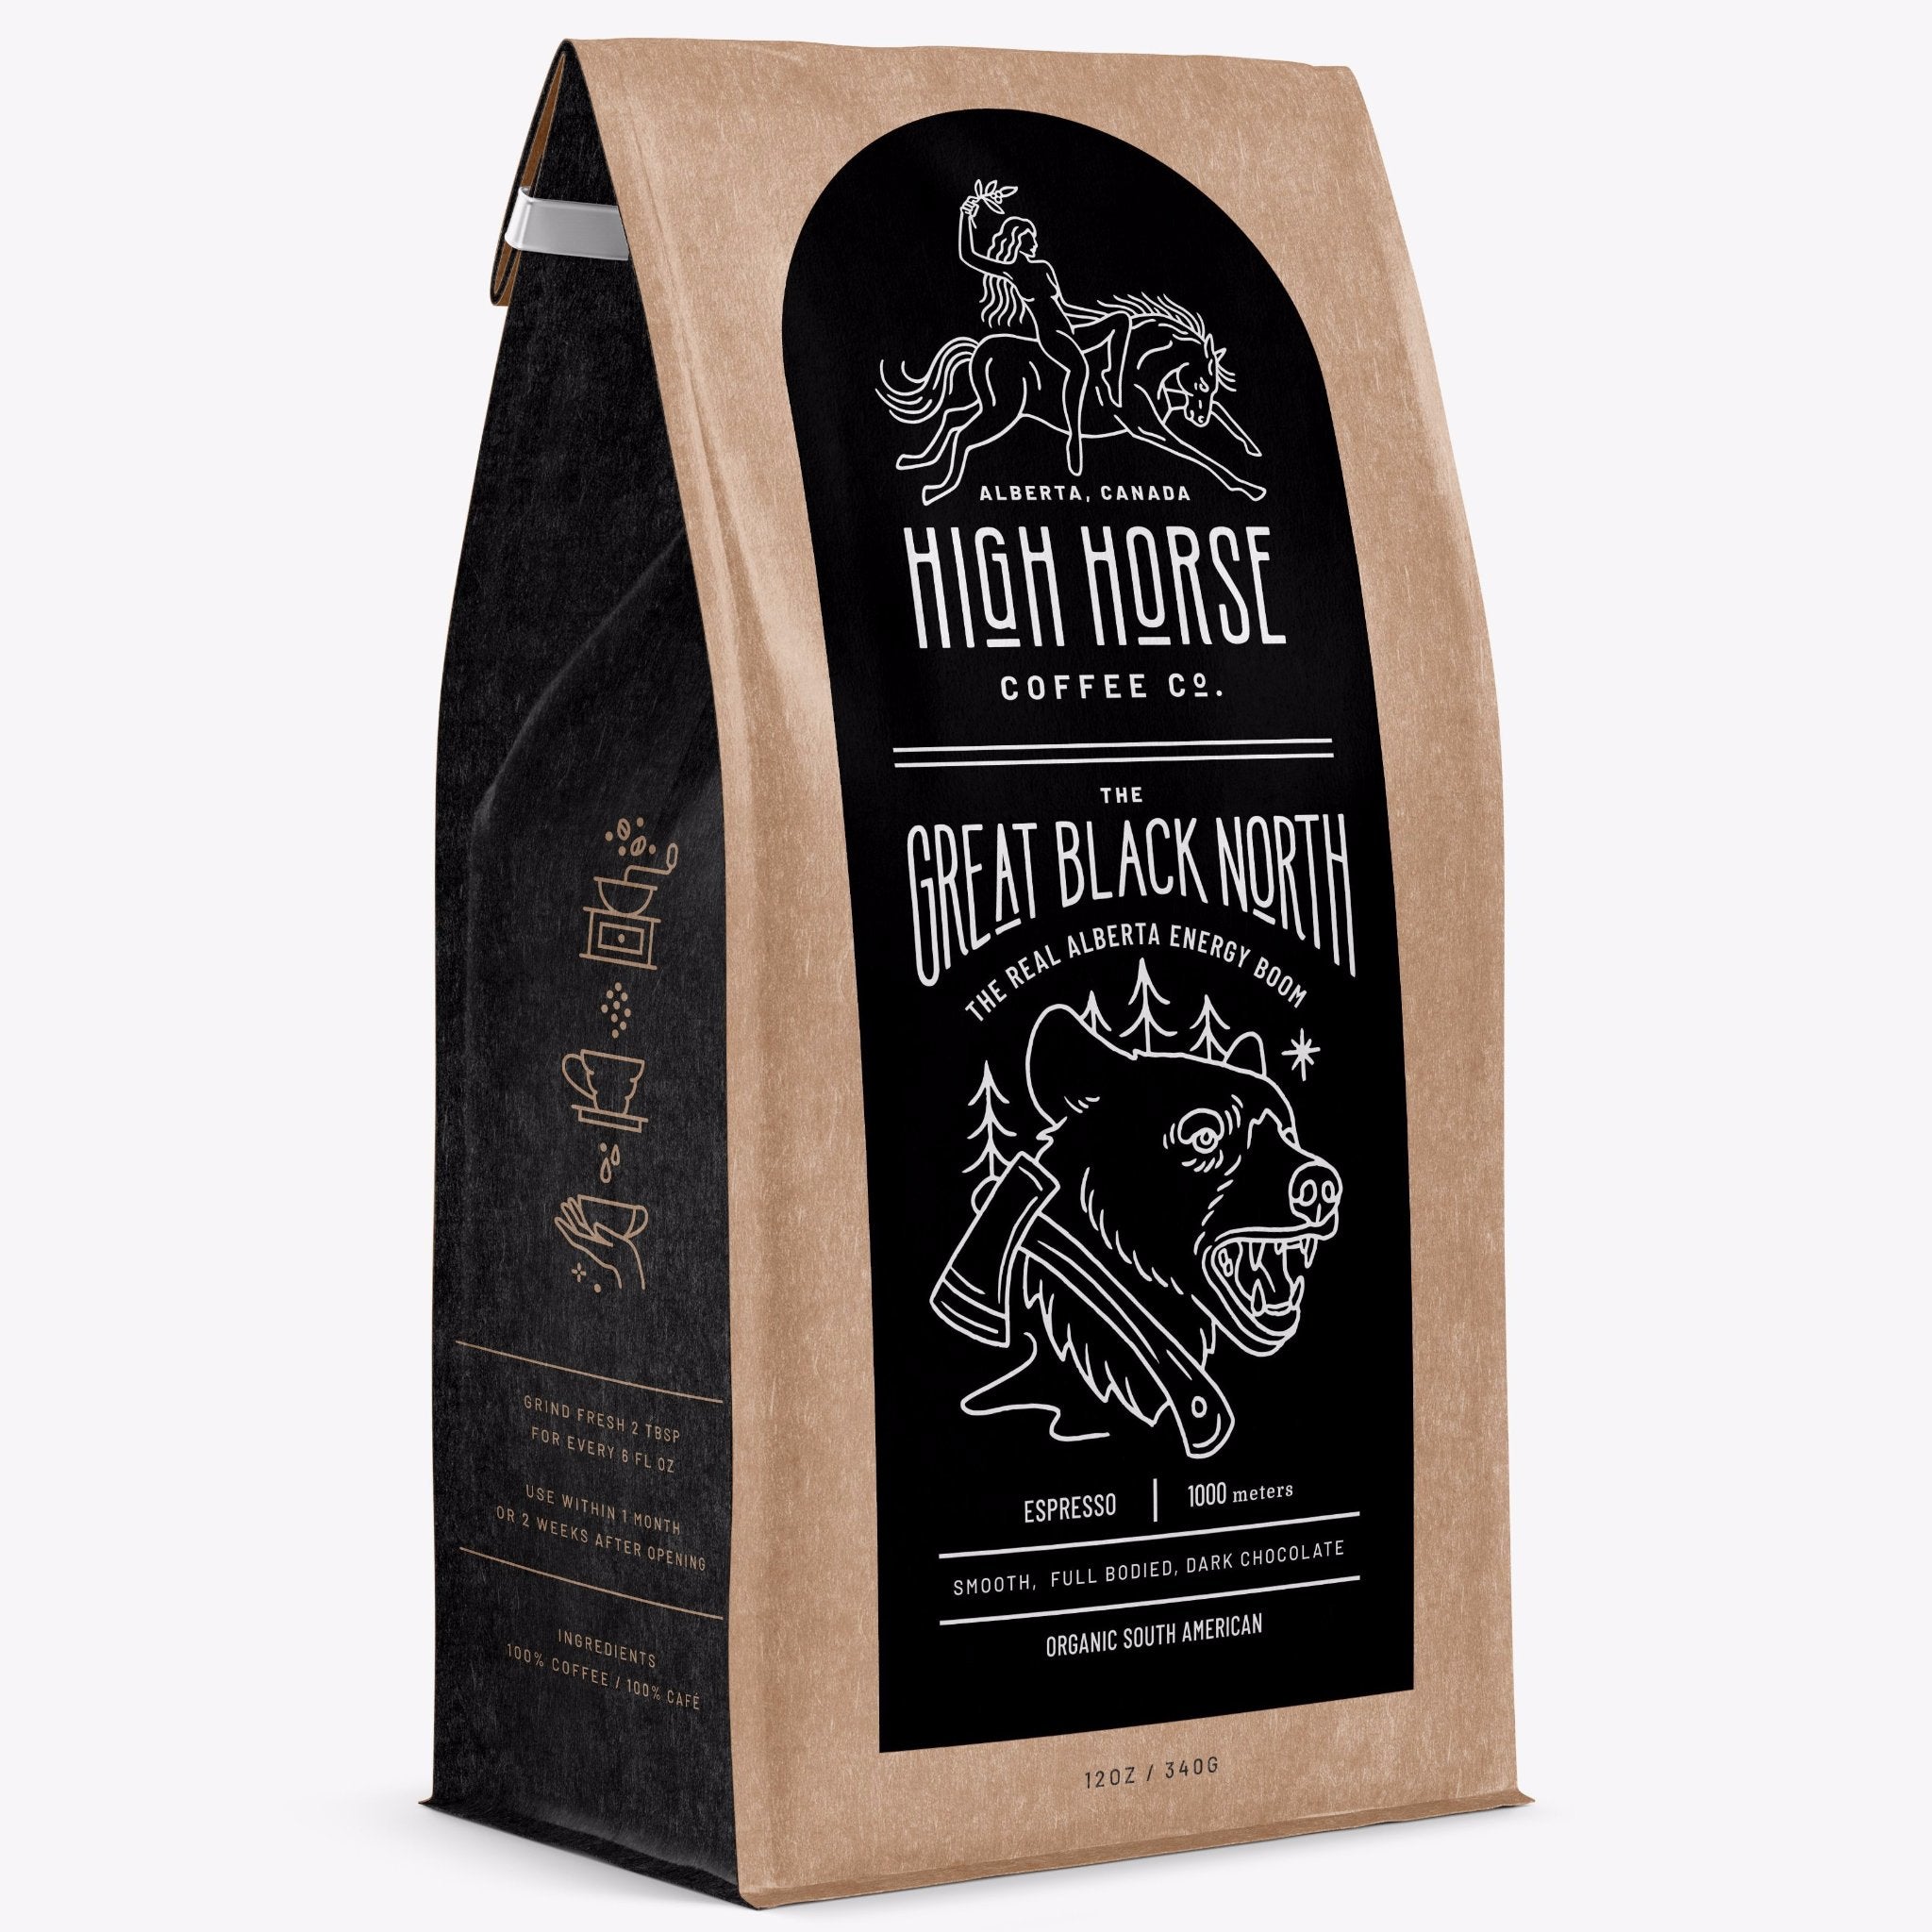 The Great Black North - High Horse Coffee Company